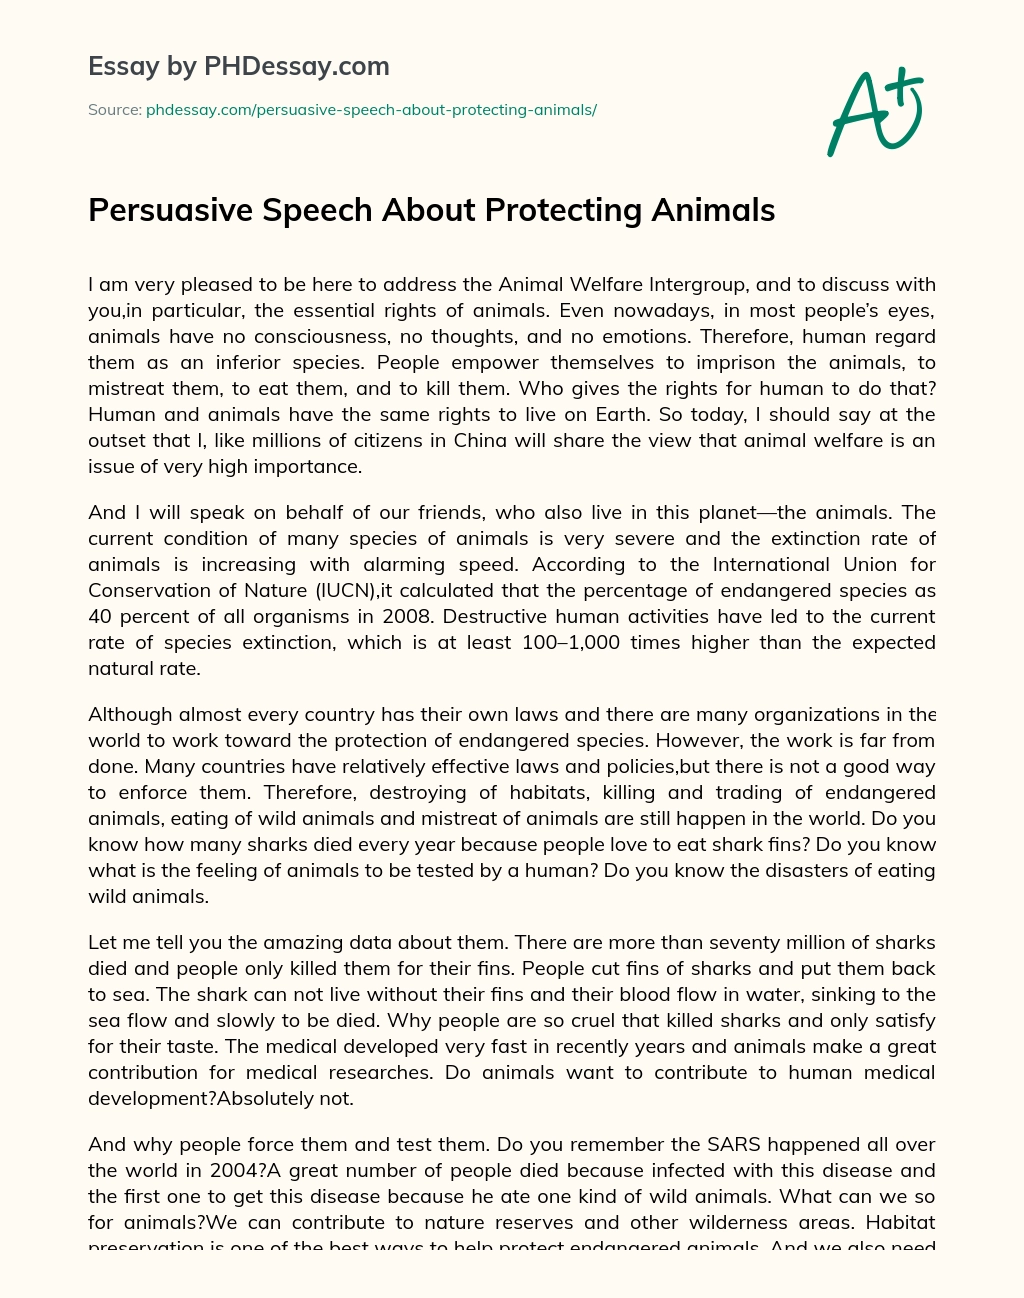 Persuasive Speech About Protecting Animals essay